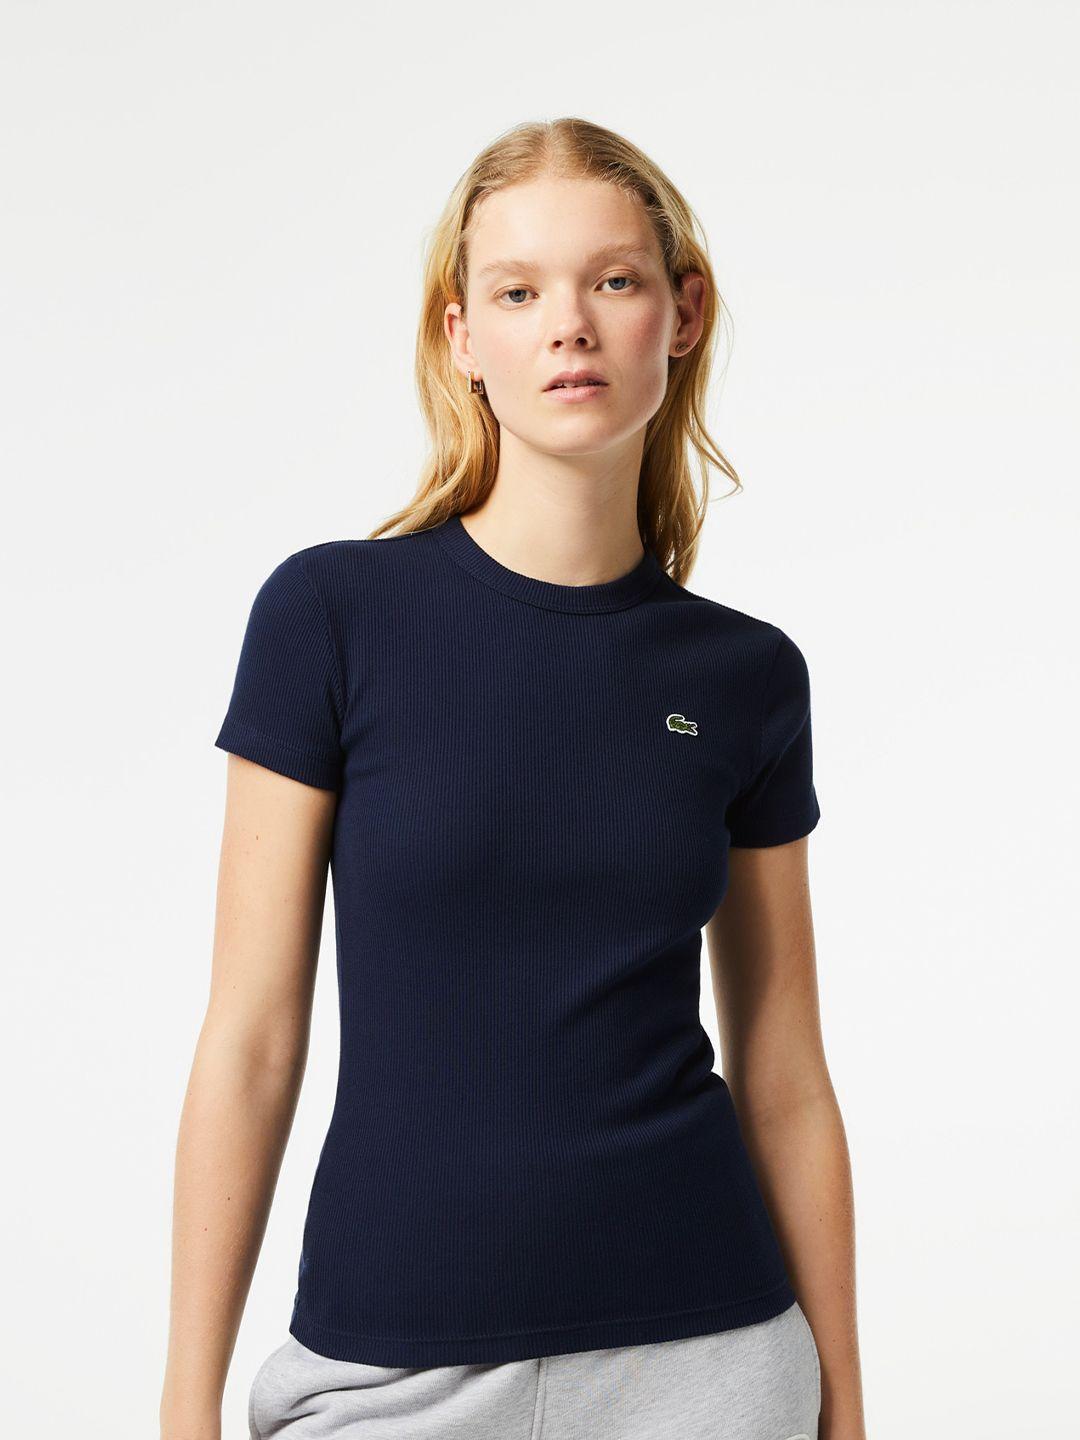 lacoste-round-neck-slim-fit-brand-logo-embroidered-cotton-t-shirt